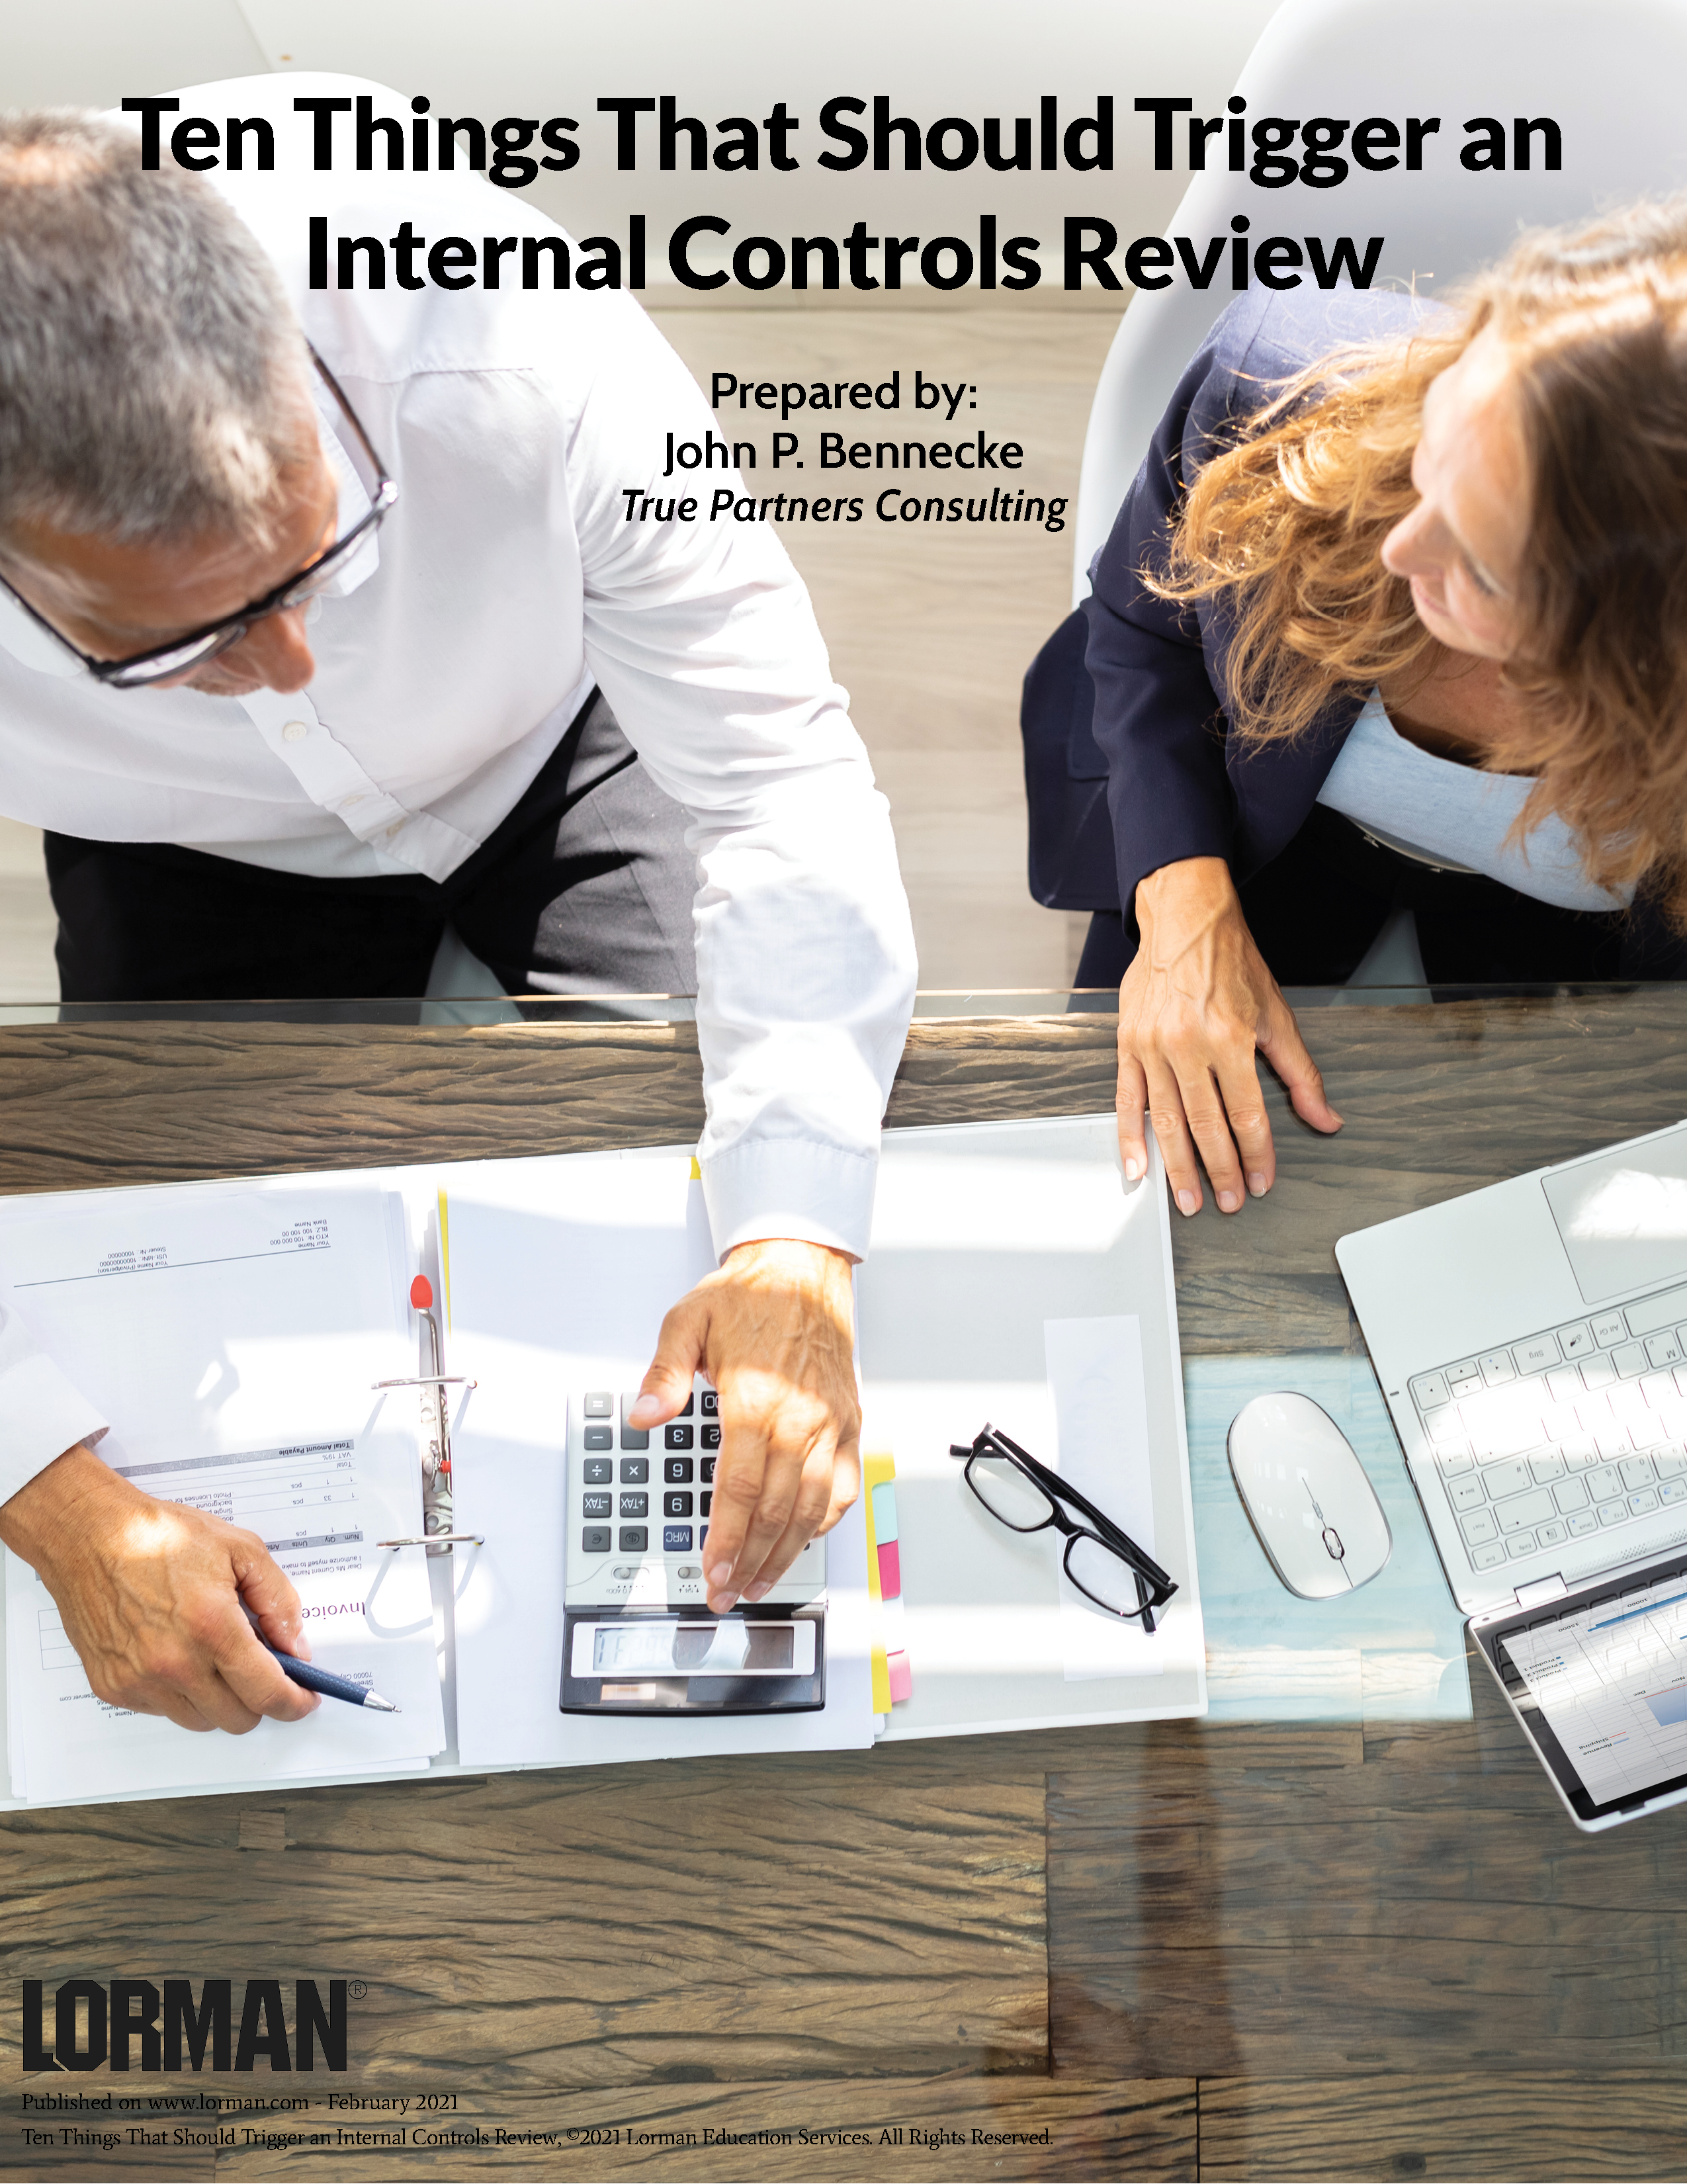 Ten Things That Should Trigger an Internal Controls Review